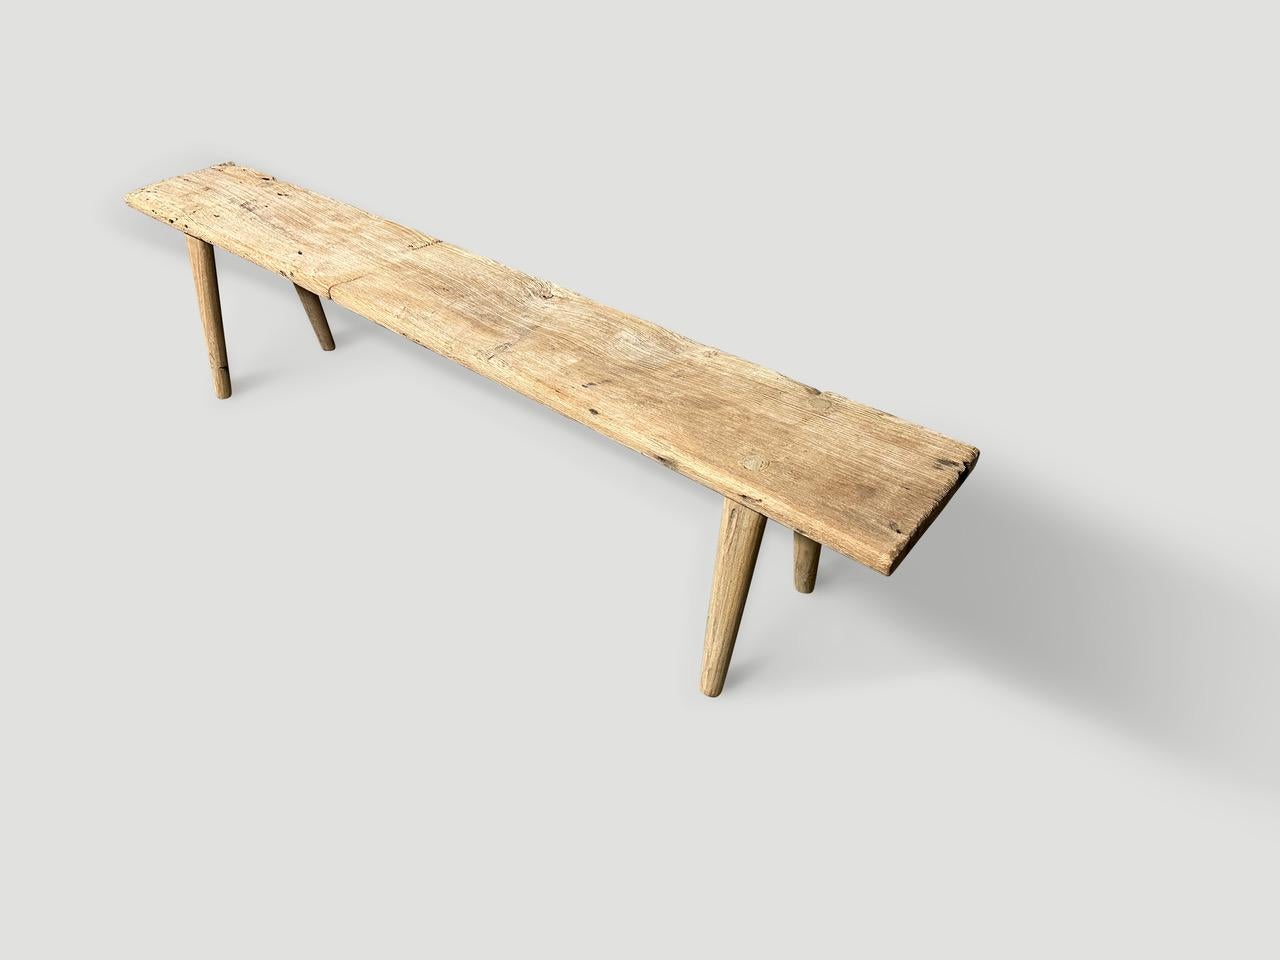 A single thick antique panel with lovely character within the wood. We added smooth teak minimalist legs to produce this beautiful bench and finished with a secret ingredient, revealing the unique wood grain. It’s all in the details.

This bench was